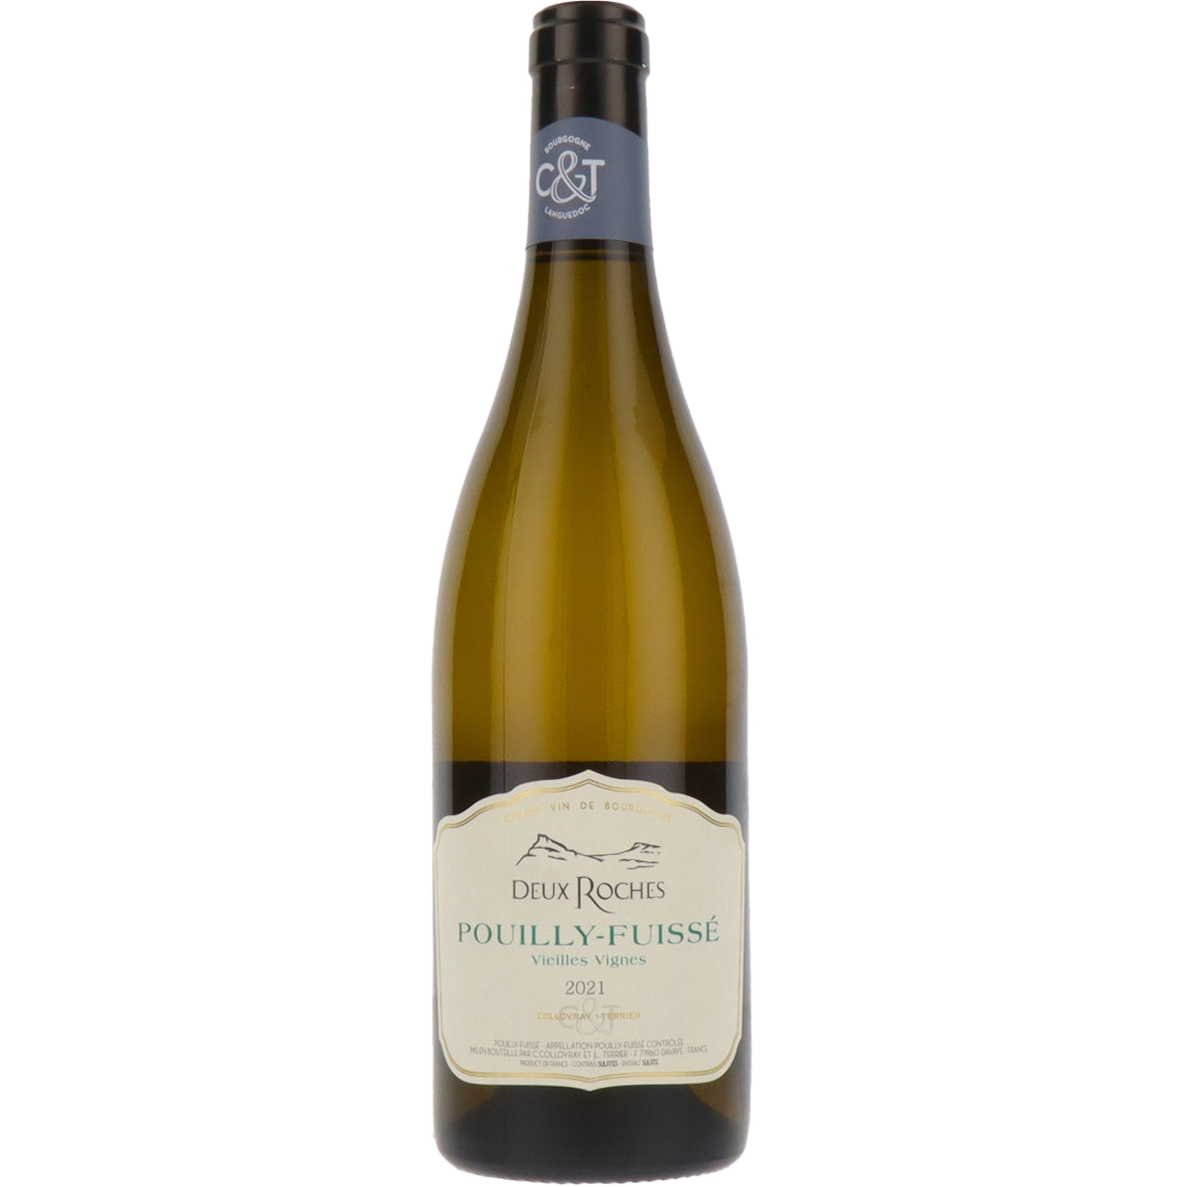 Collovray & Terrier 'Deux Roches' Chardonnay, Pouilly-Fuisse, France